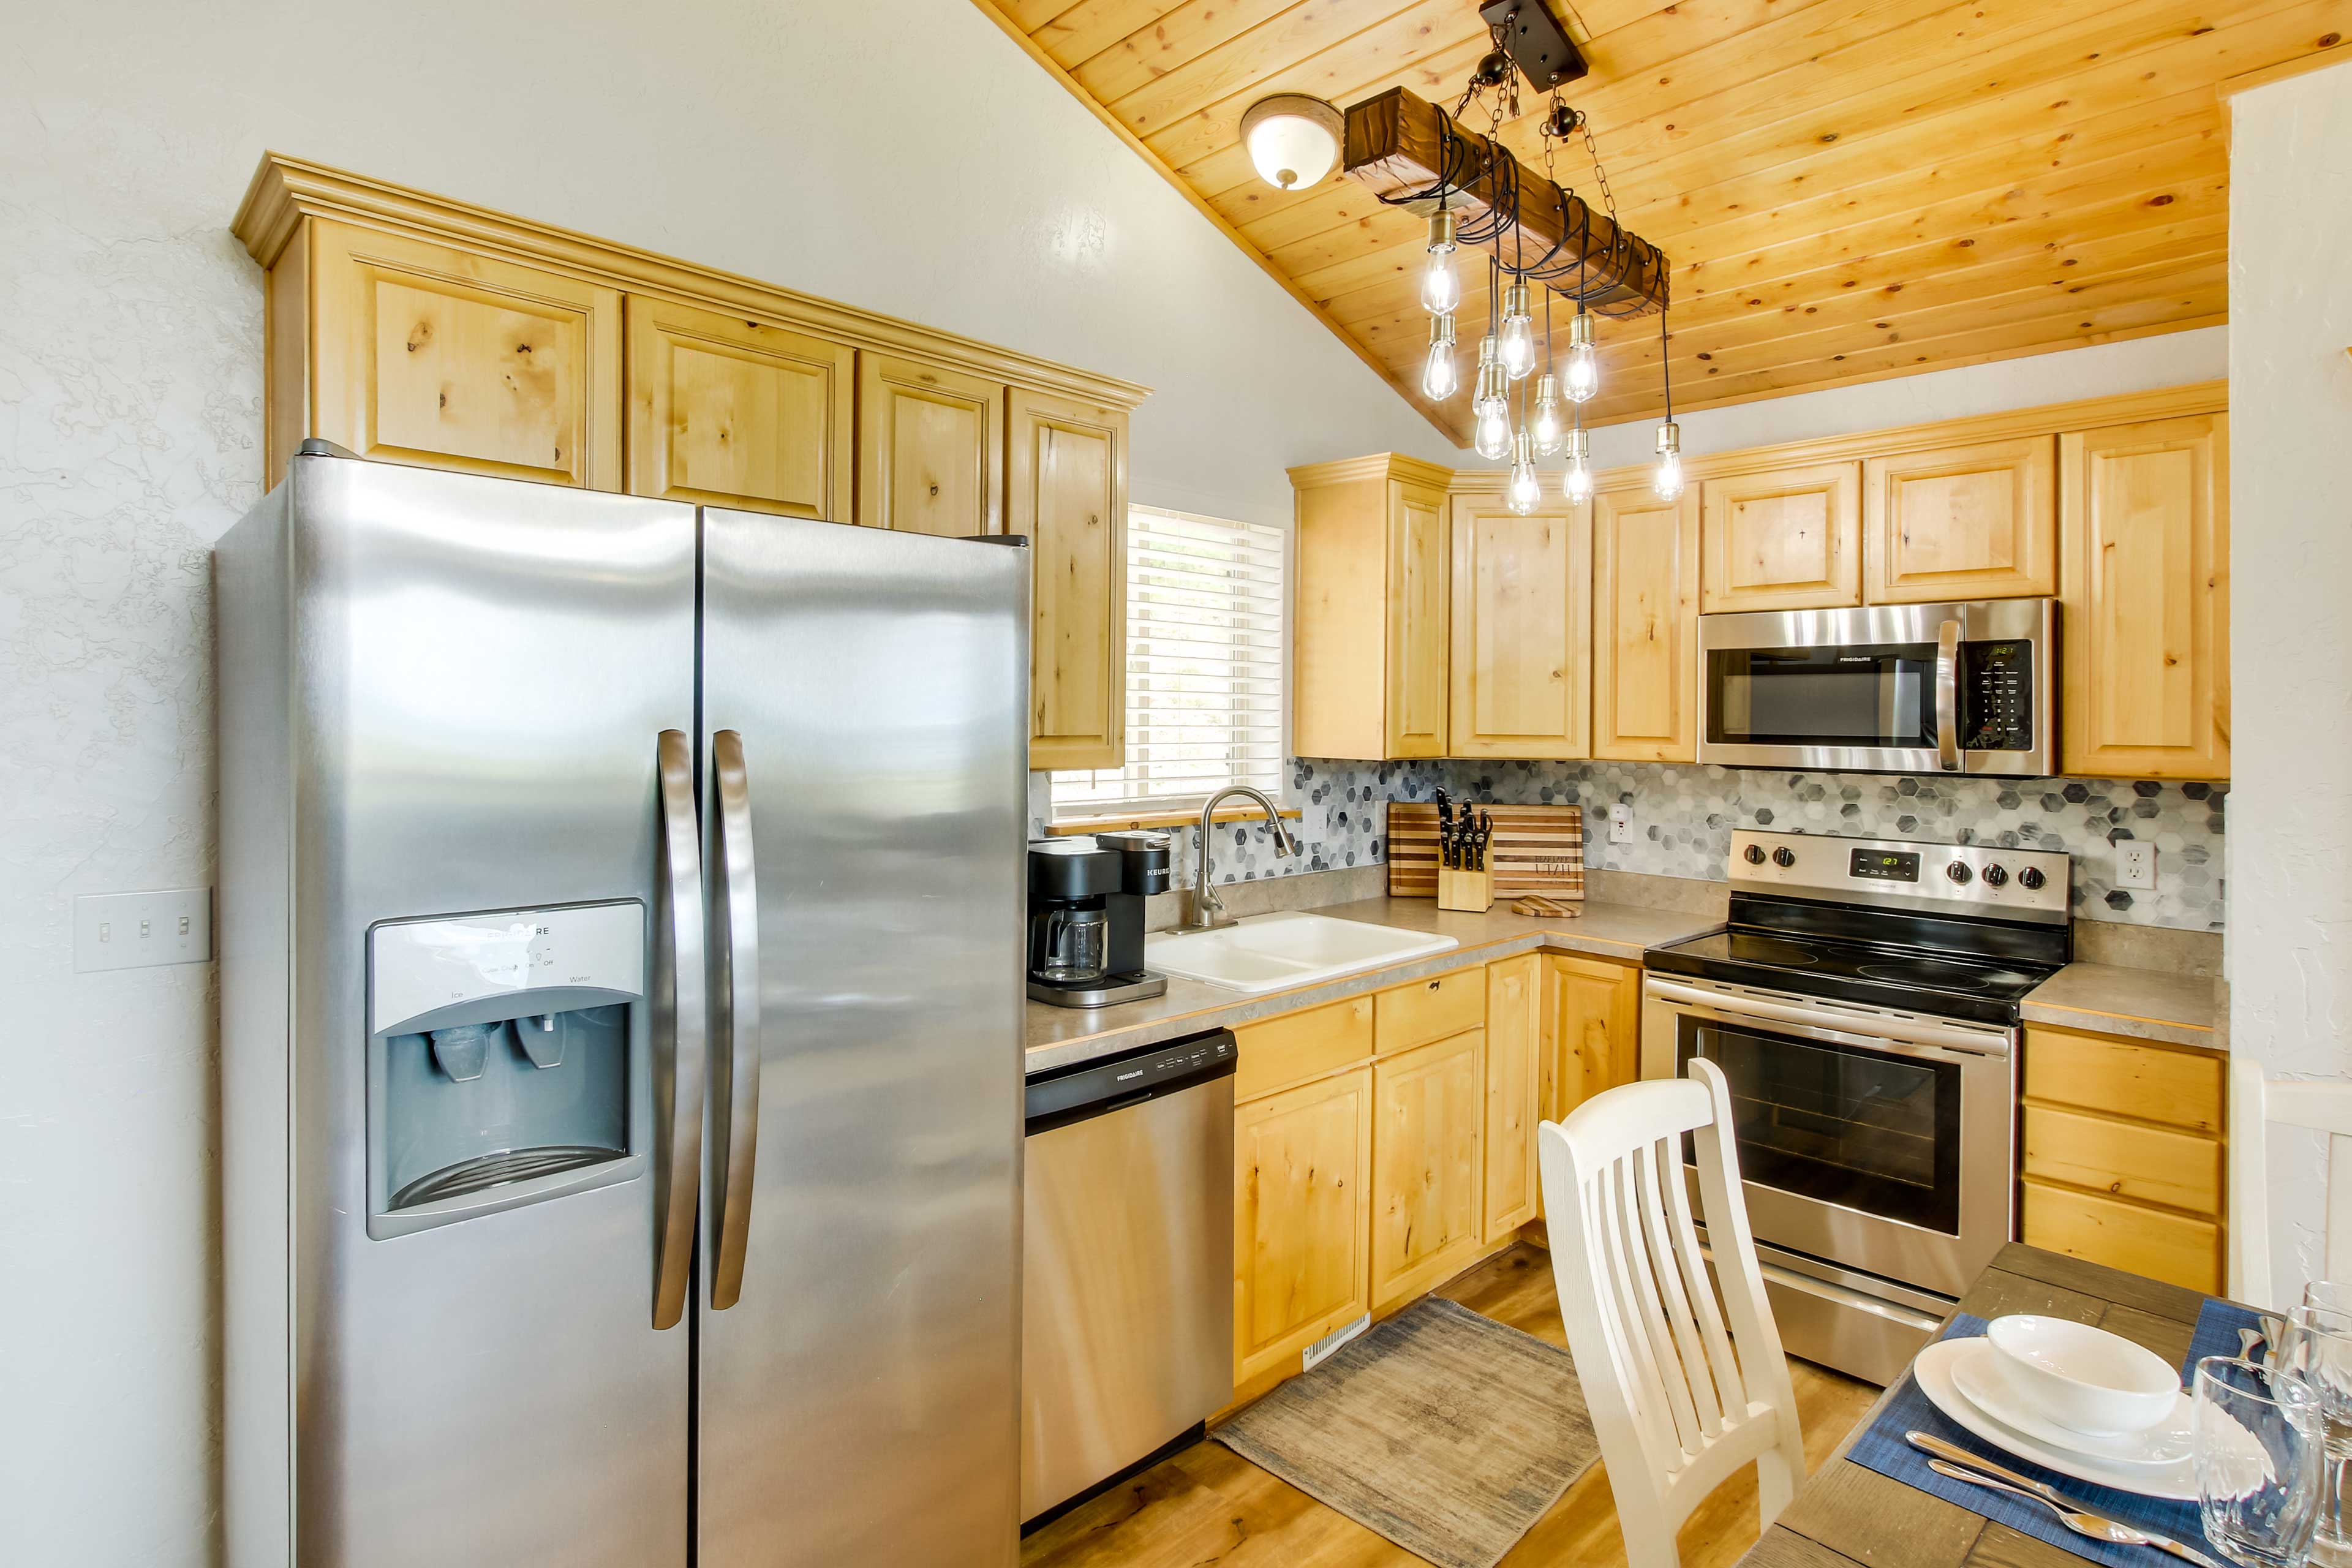 Kitchen | Fully Equipped | Cooking Basics | Coffee Maker | Toaster | Crock-Pot